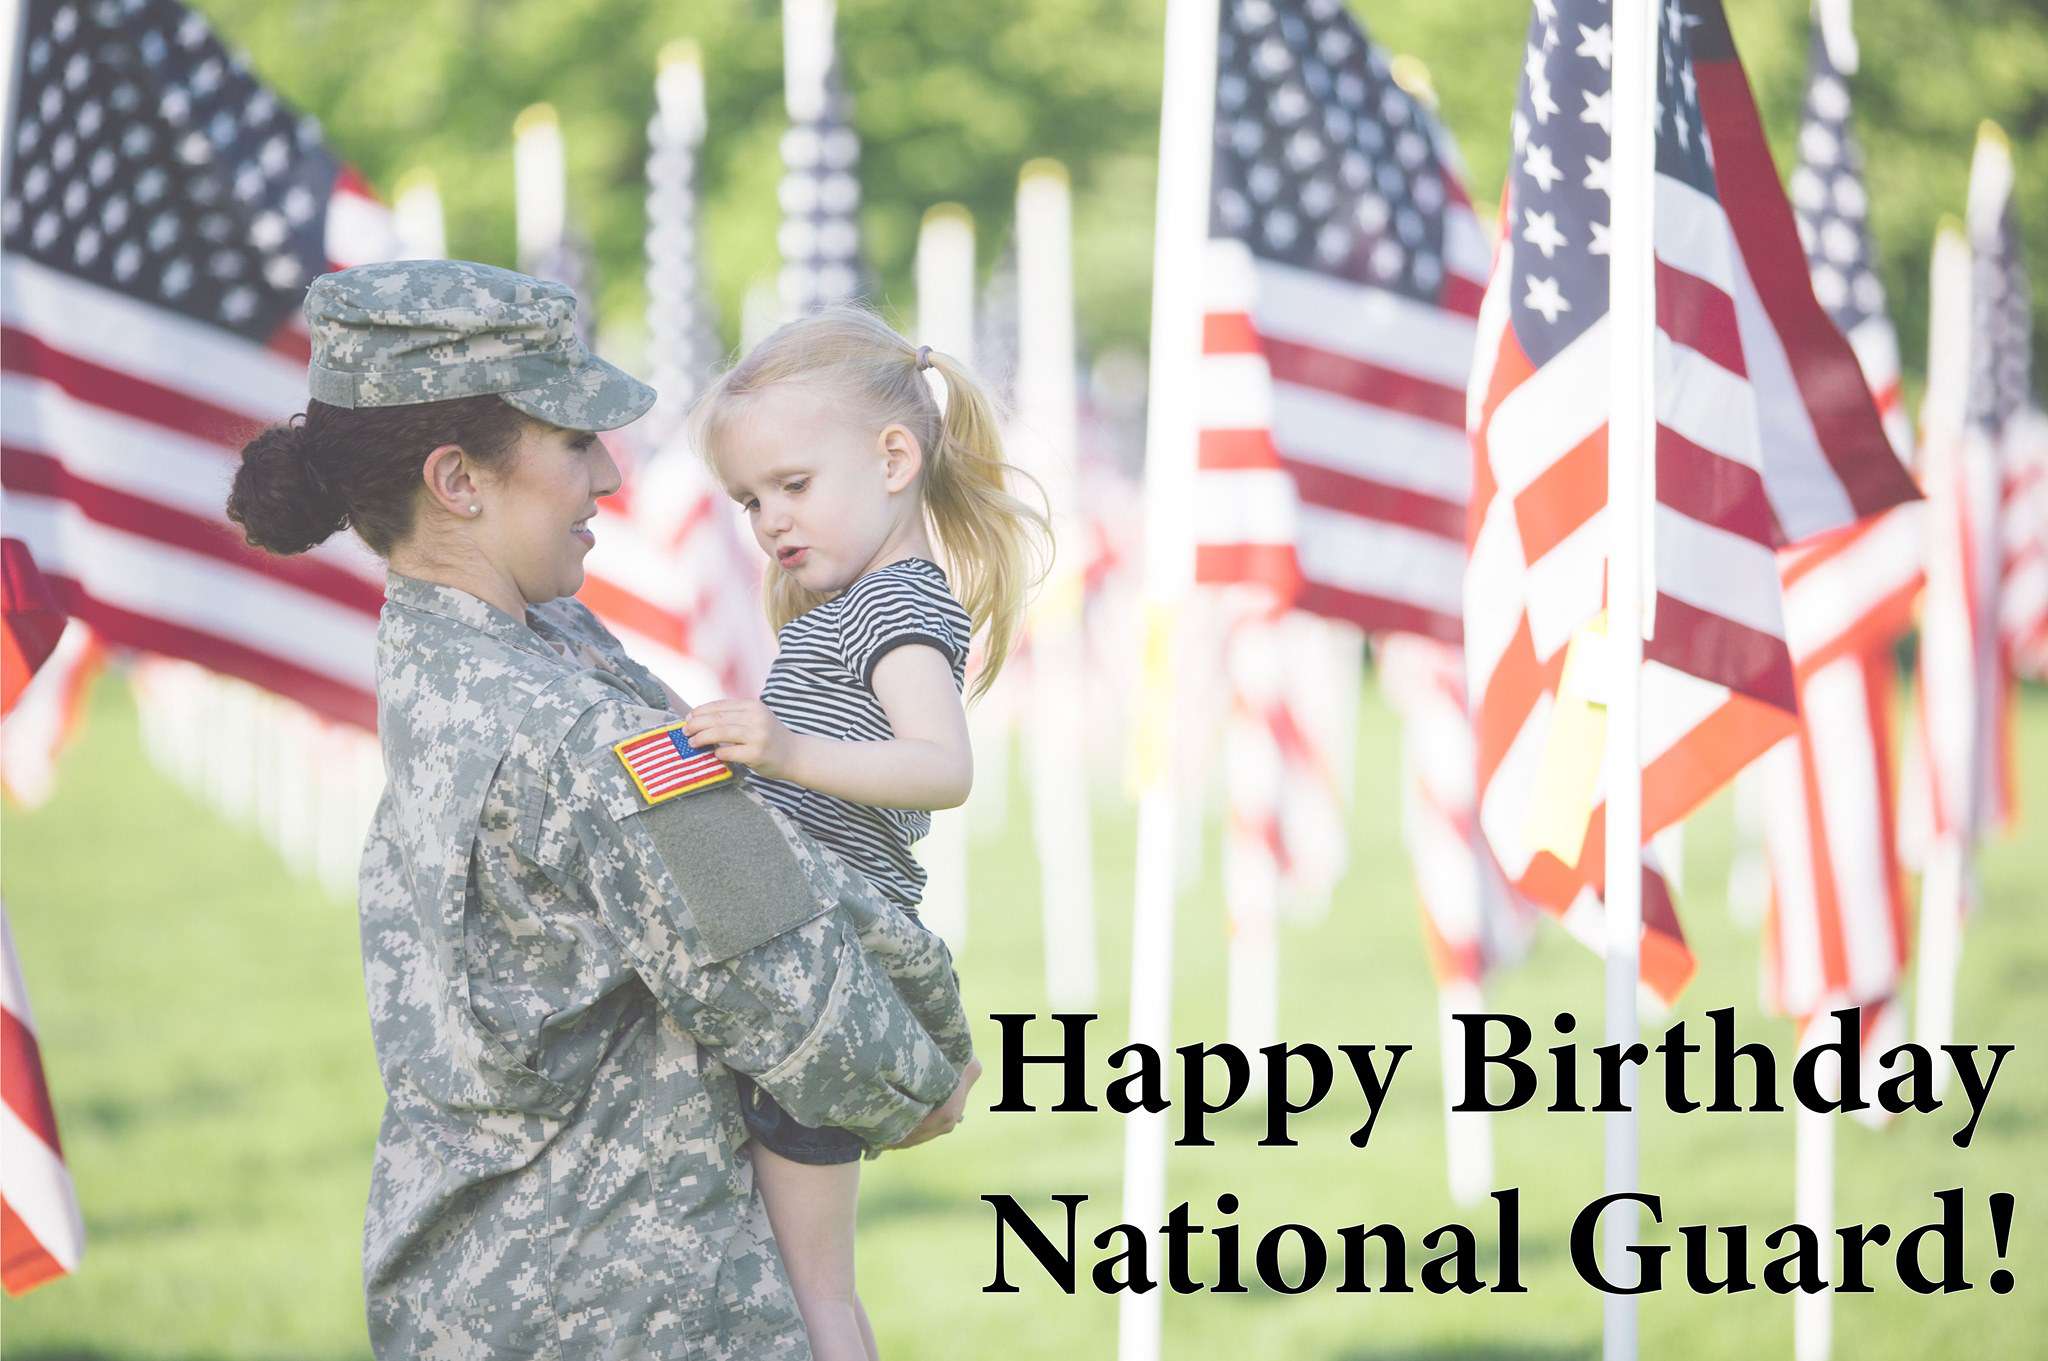 U.S. National Guard Birthday Wishes Awesome Images, Pictures, Photos, Wallpapers